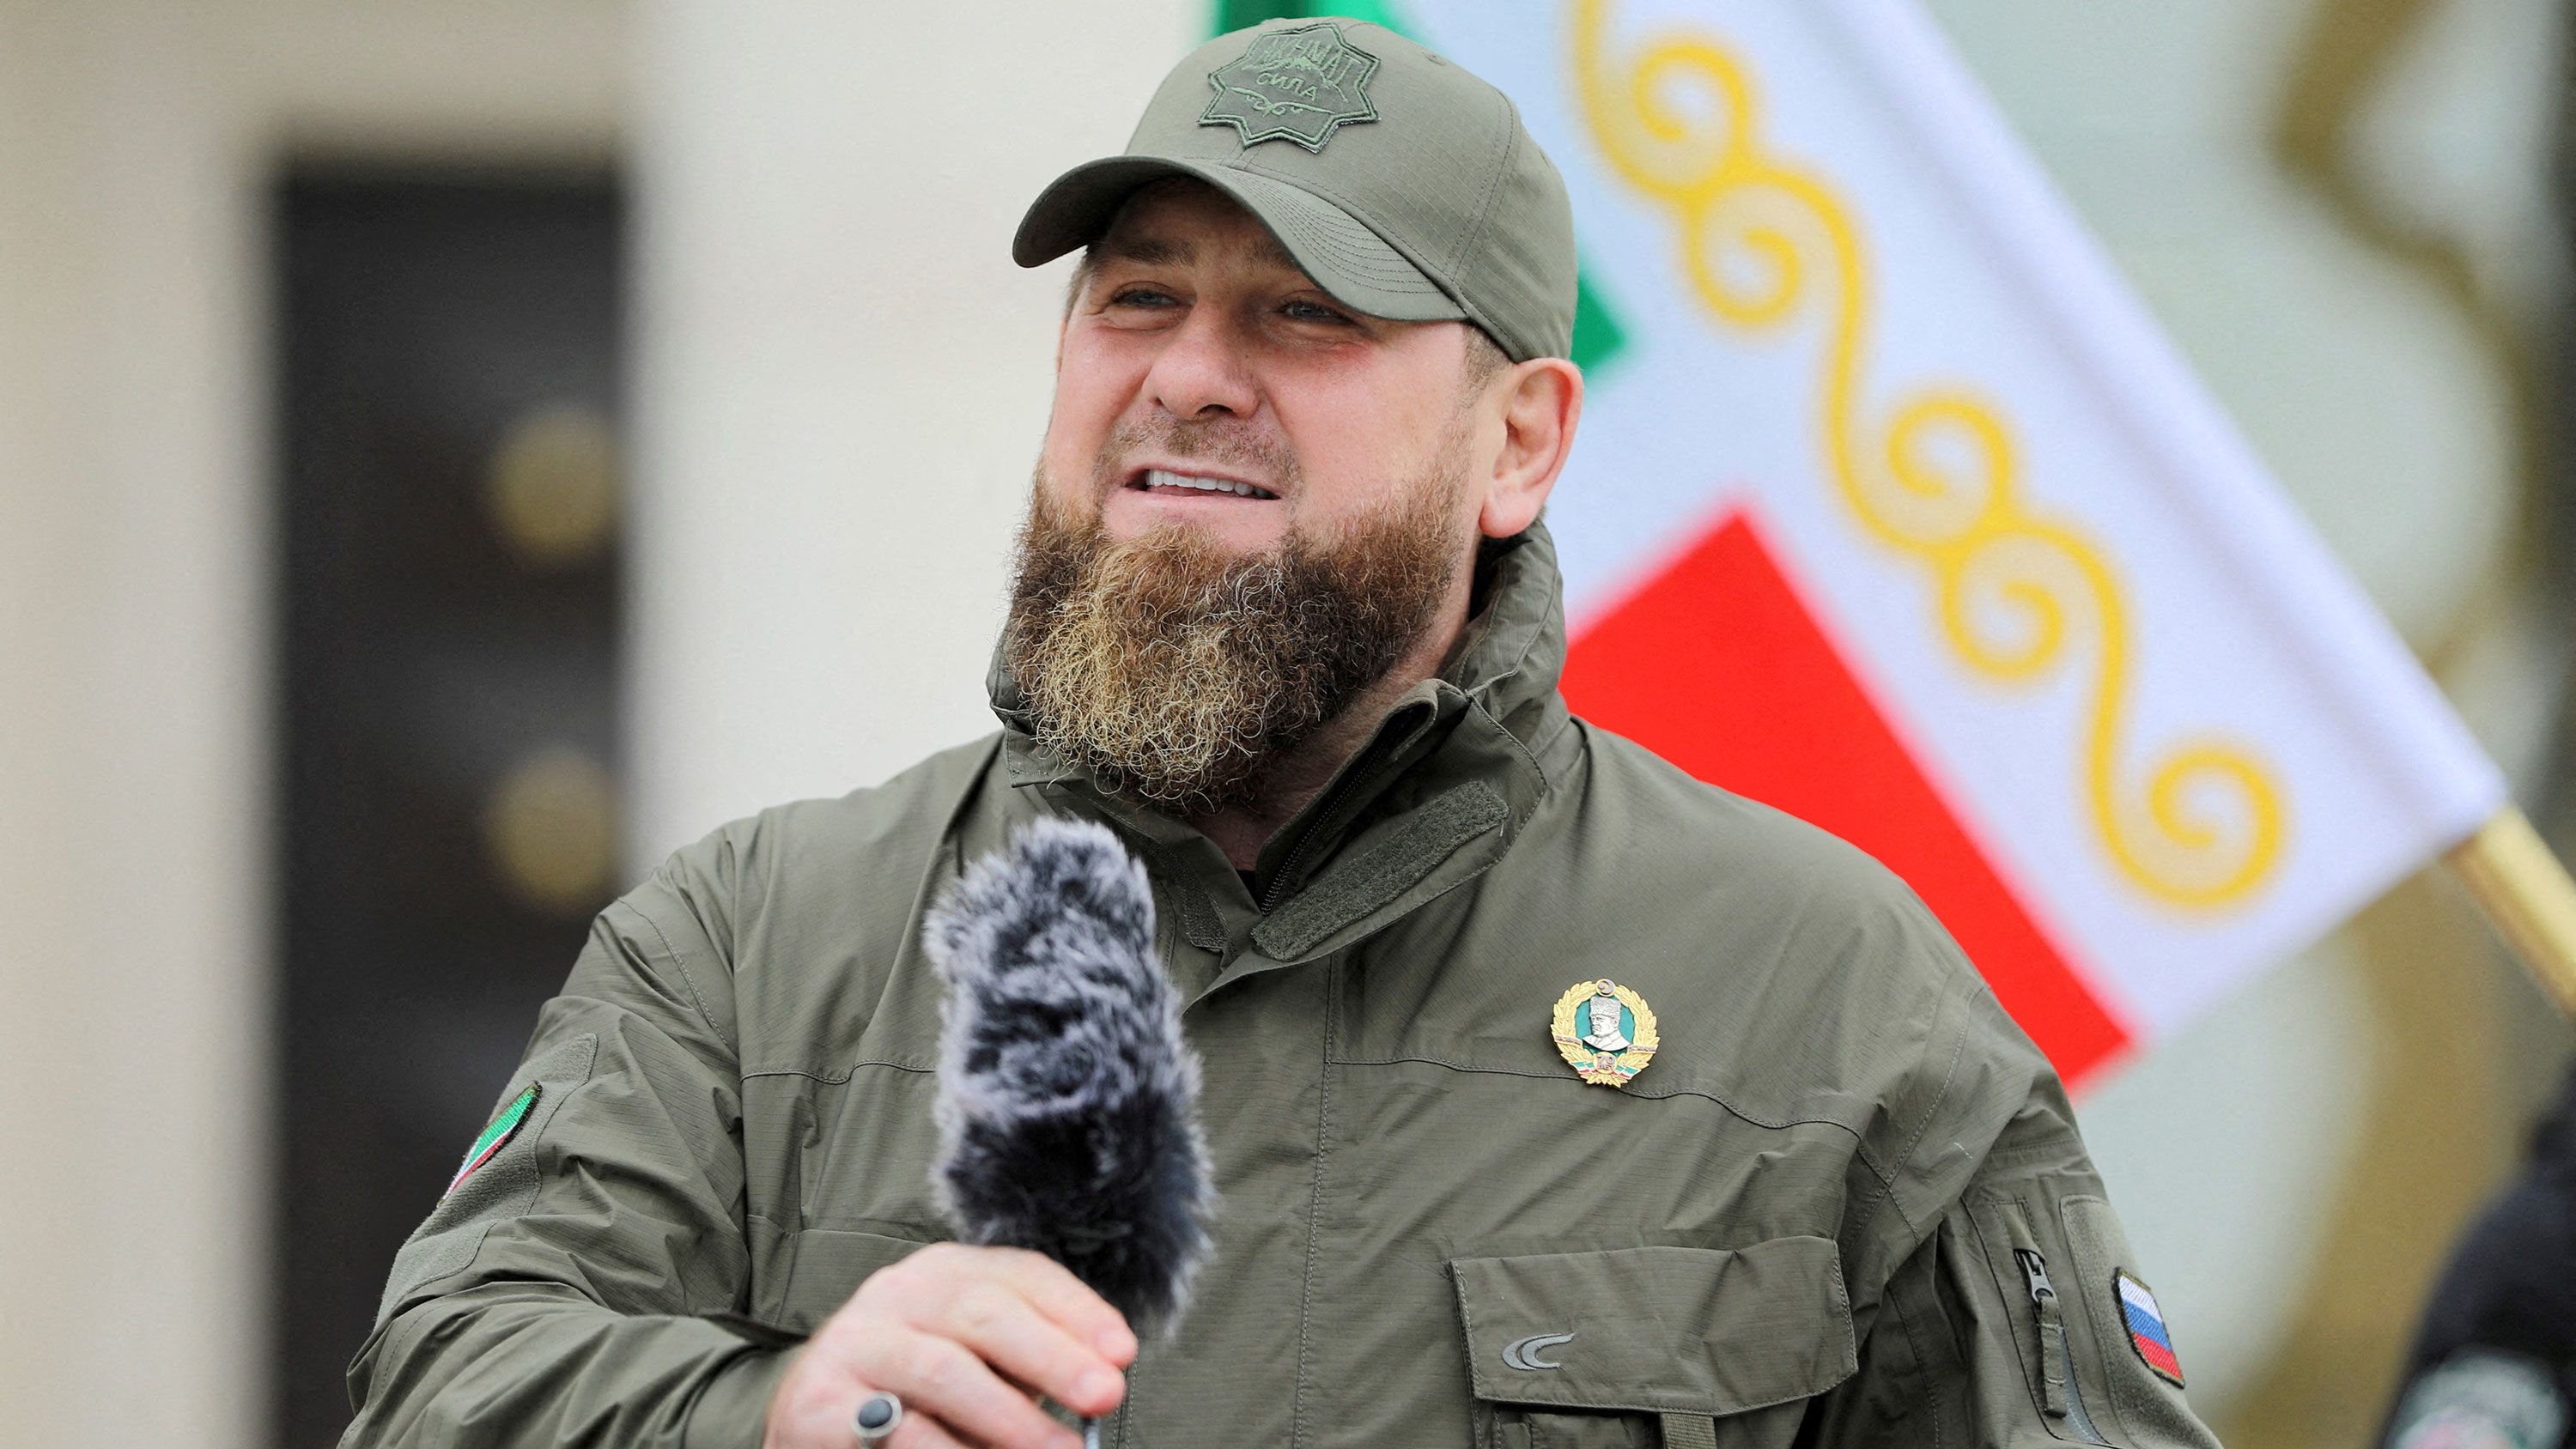 Chechen Leader Has More Interactions With UFC Fighters Amid US